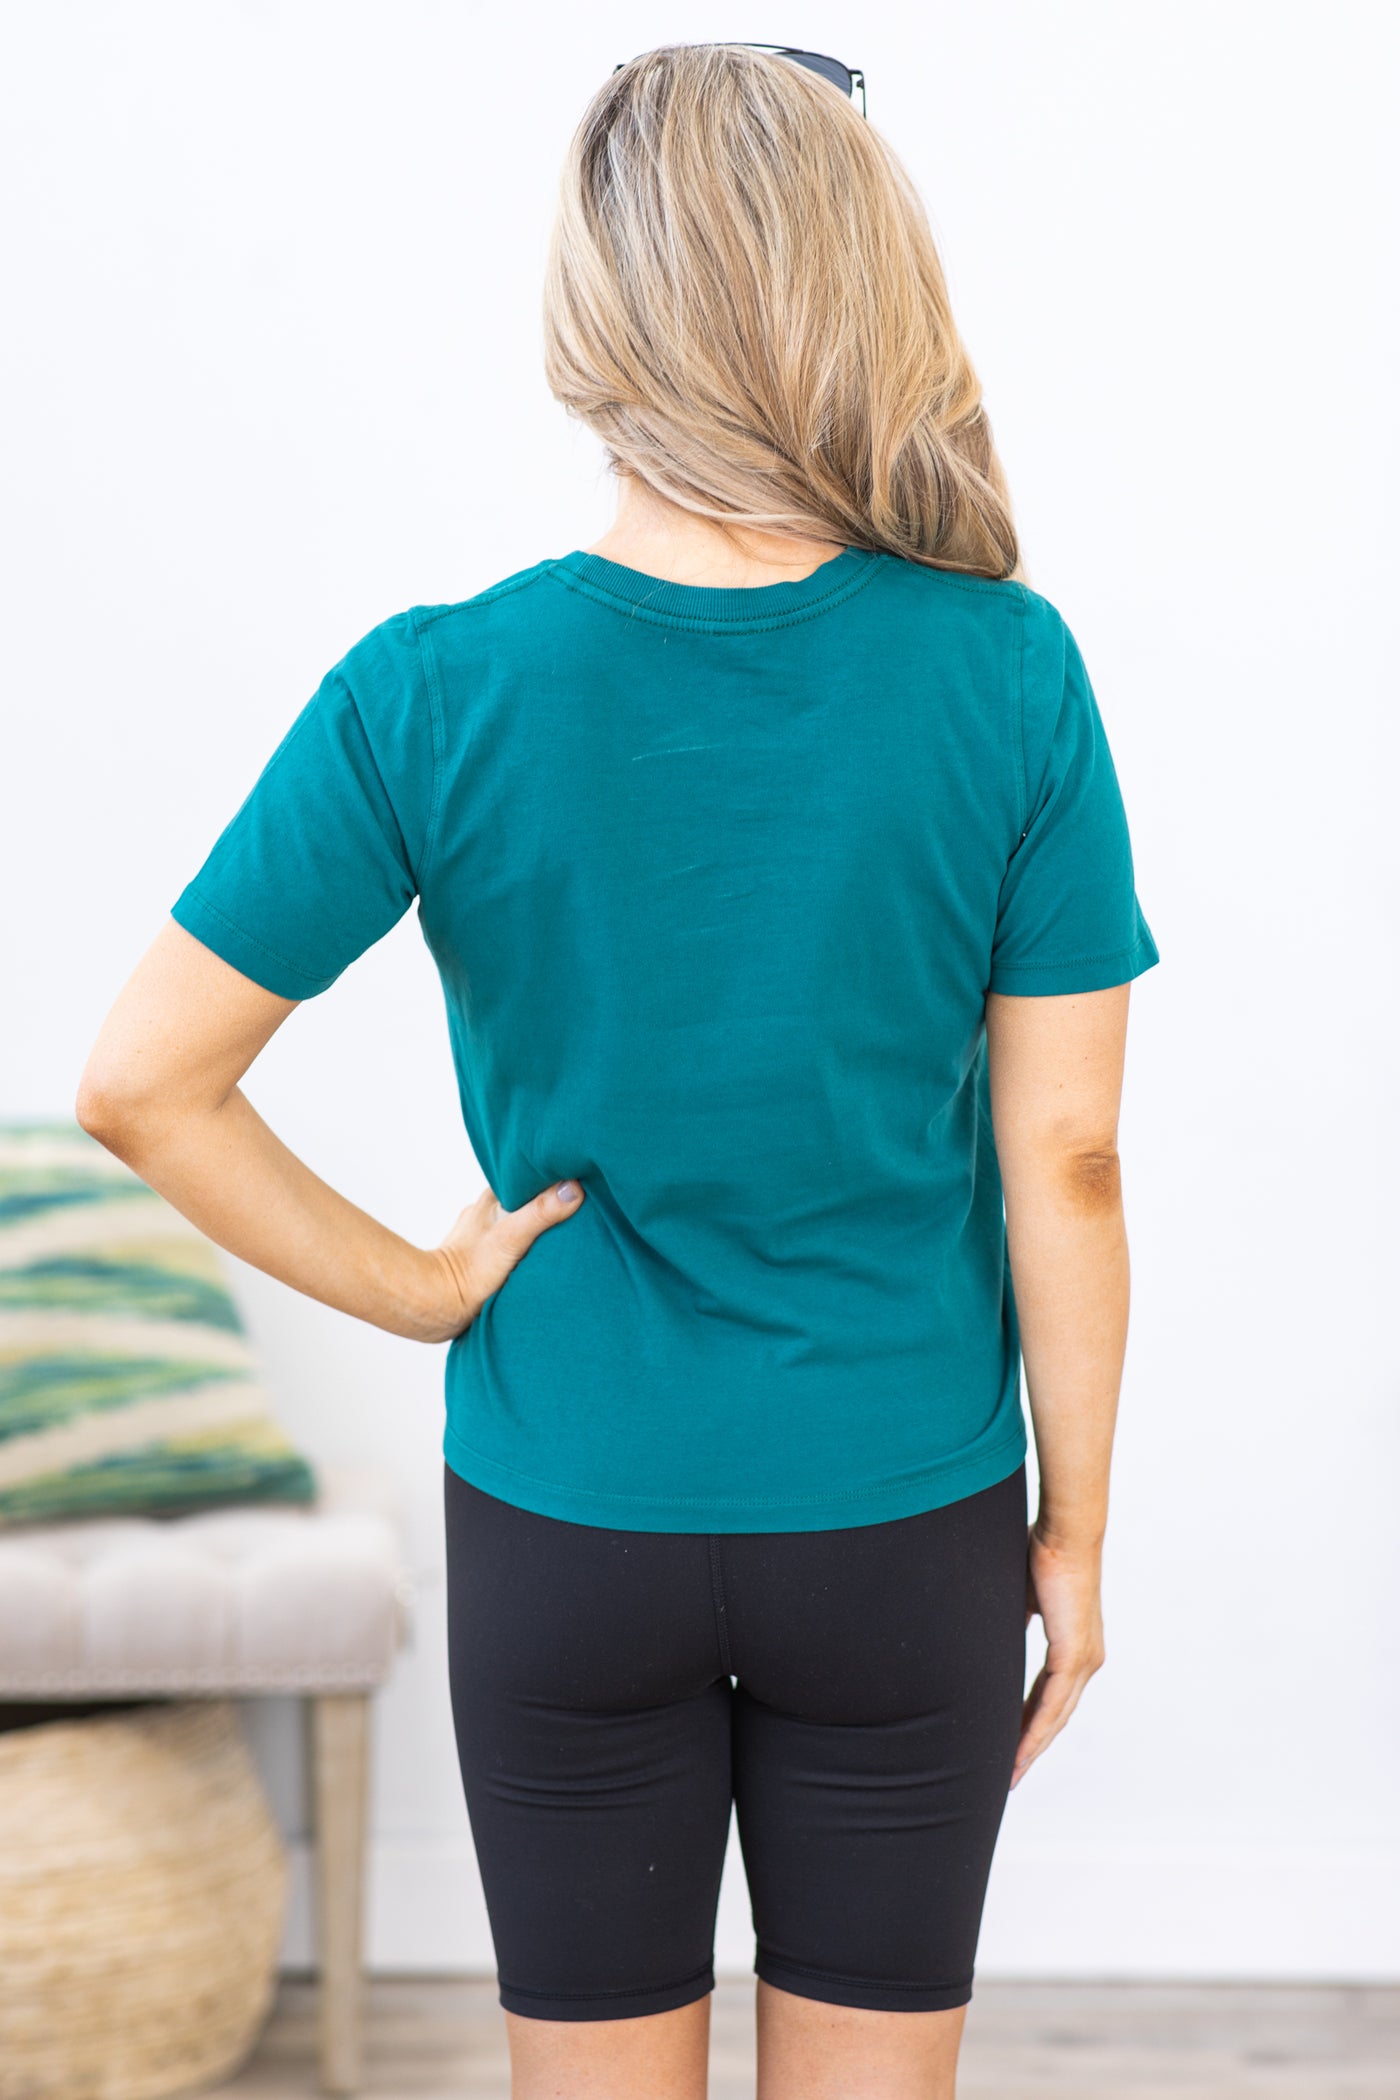 Teal Classic Boxy Fit Top